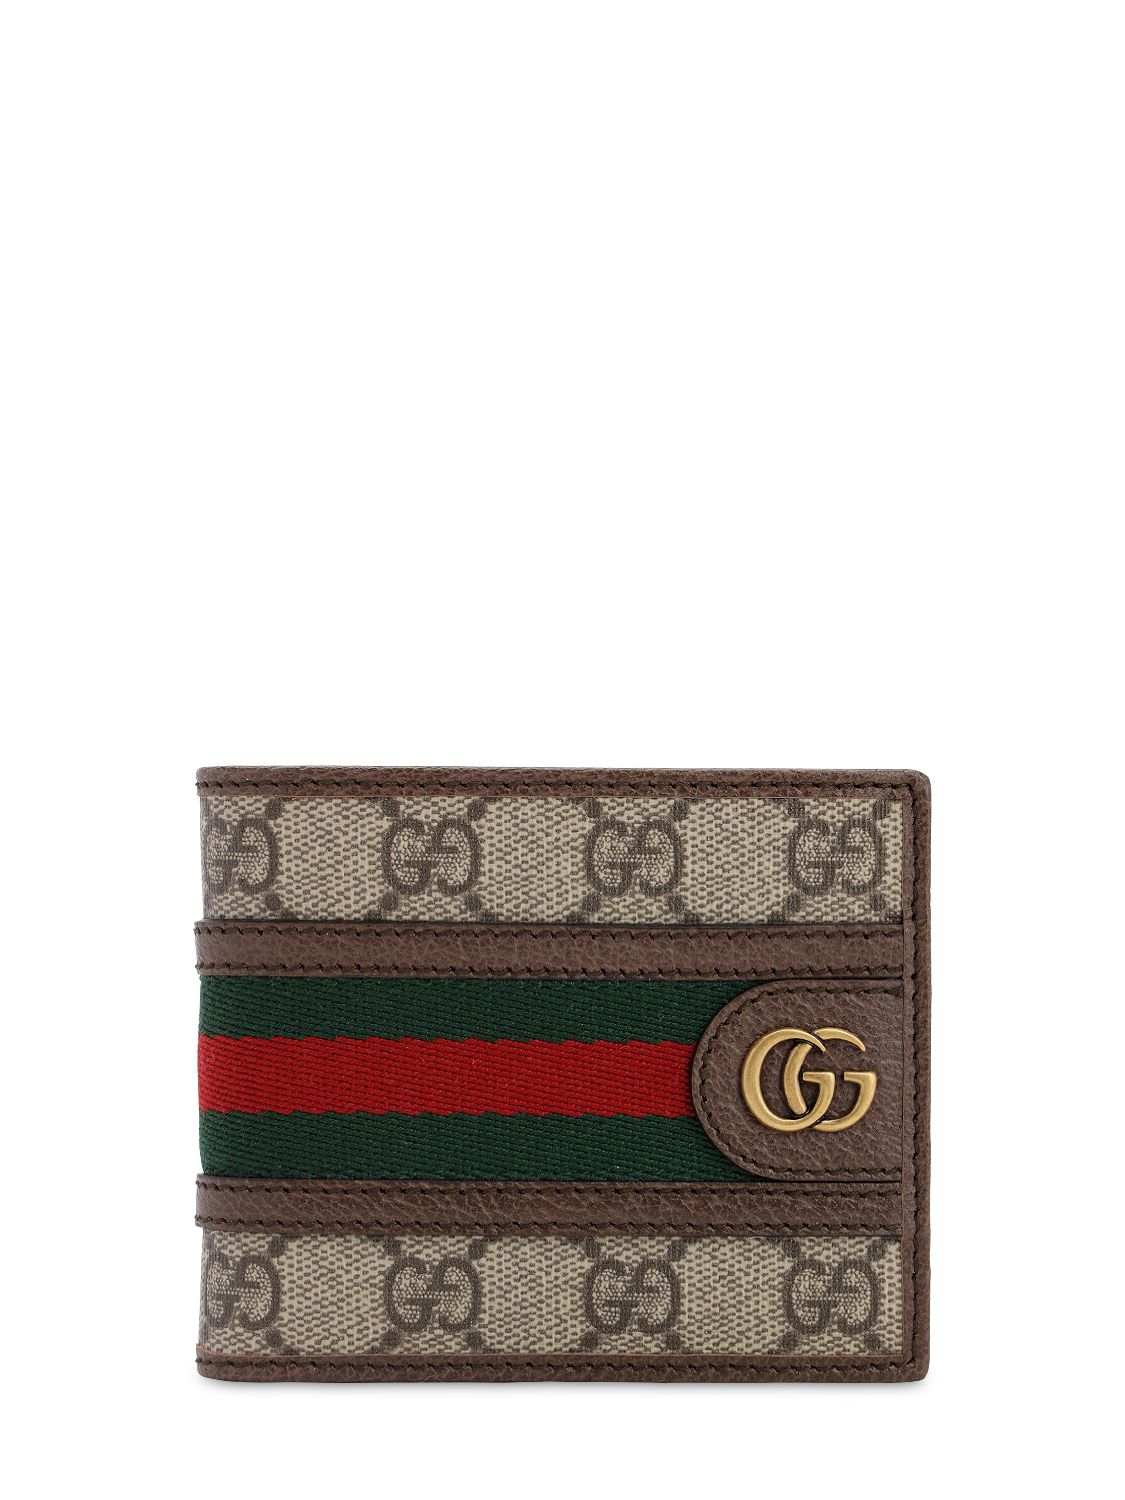 Ophidia Gg Supreme Coated Classic Wallet